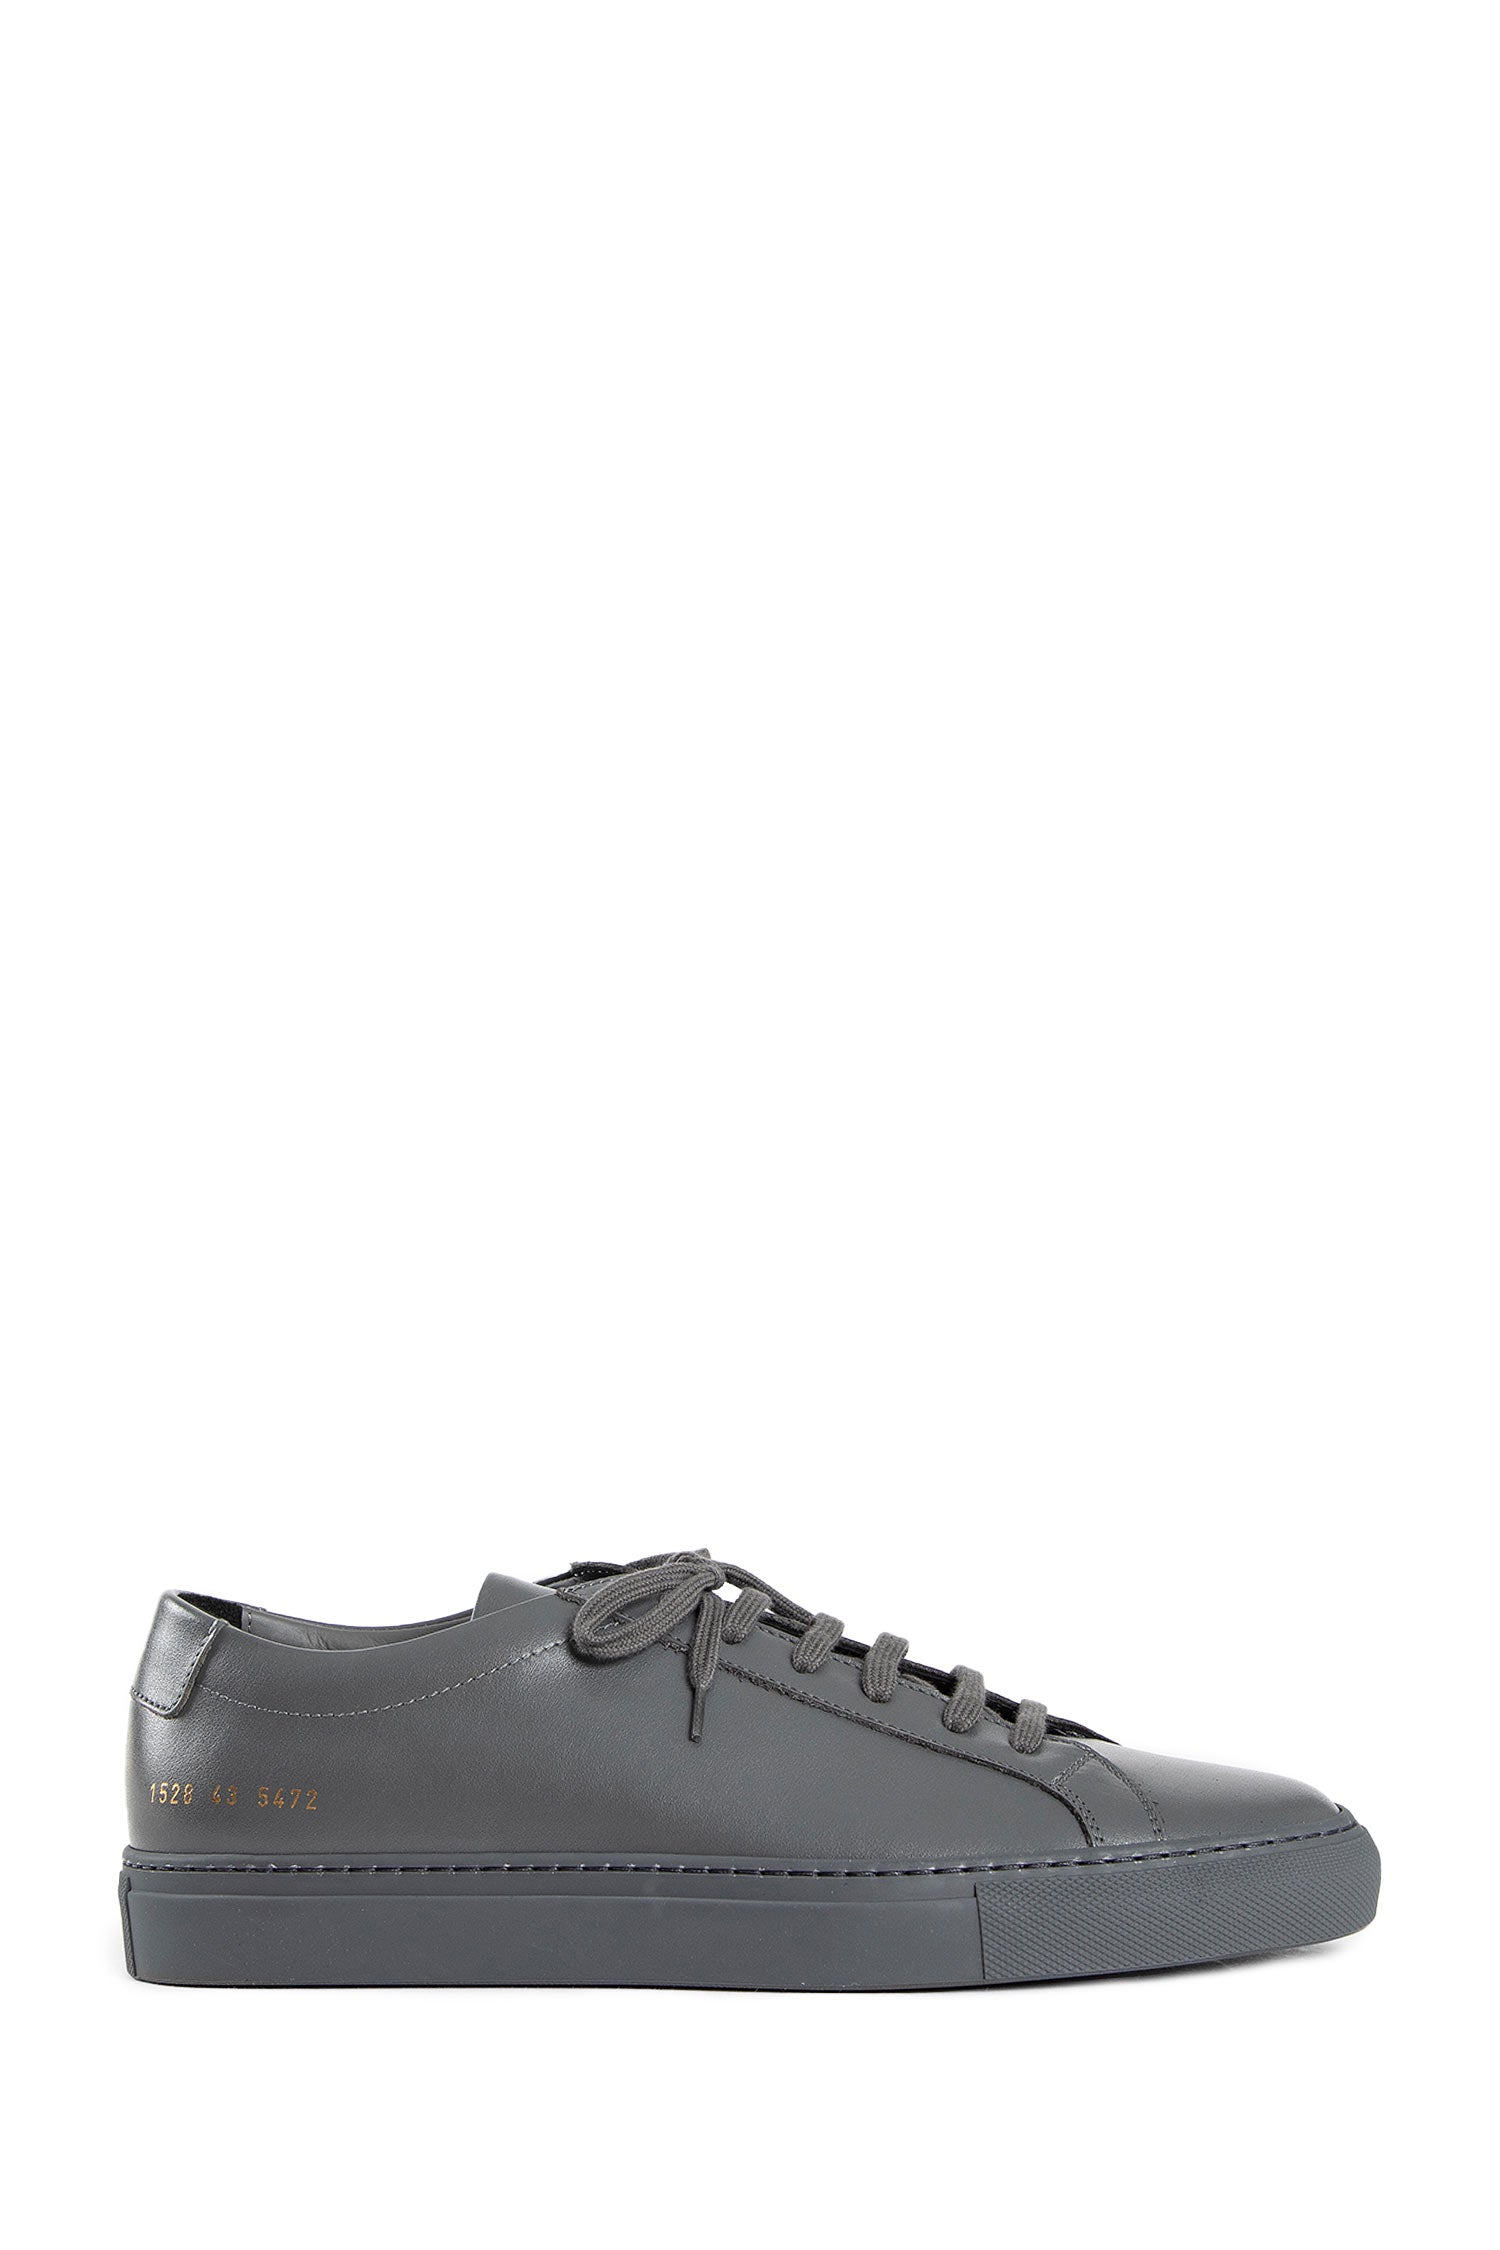 COMMON PROJECTS MAN GREY SNEAKERS